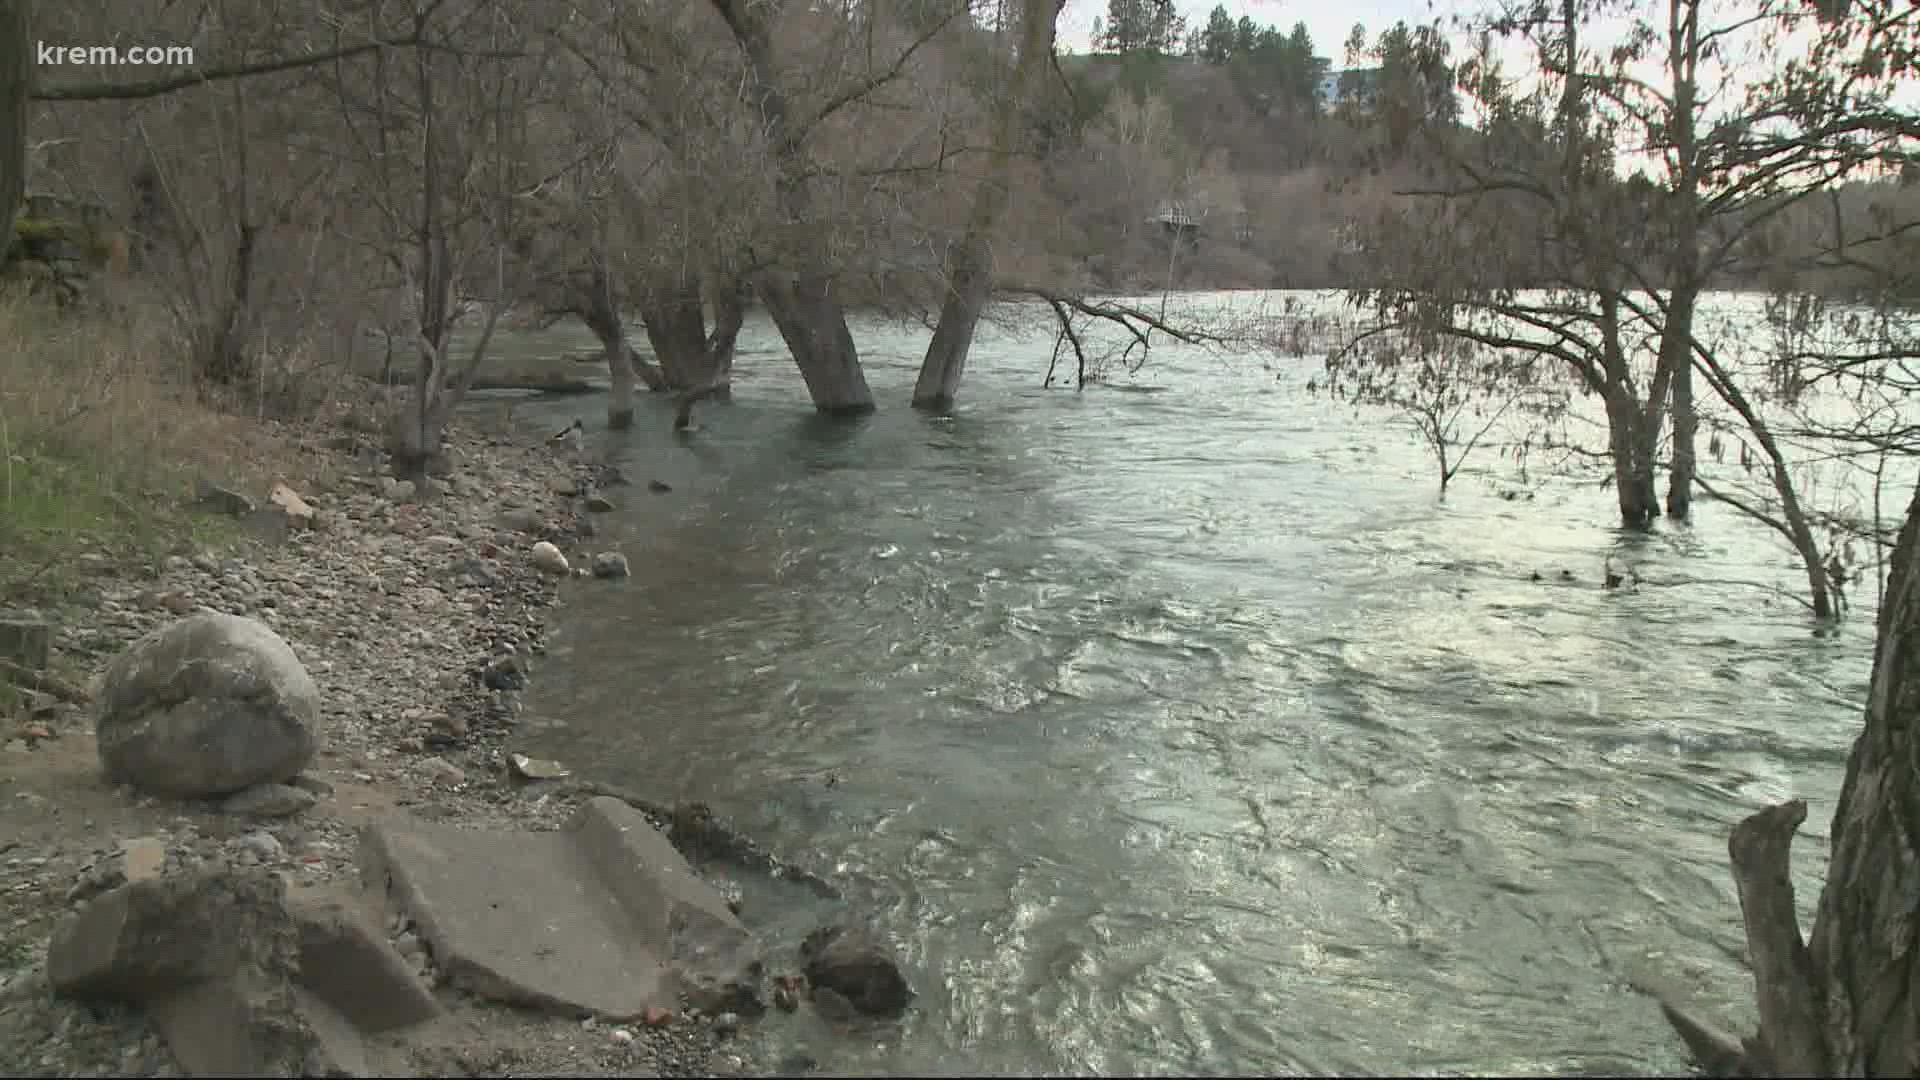 Spokane Riverkeeper Jerry White Jr. says the river is running high and creeping up the banks, which are home to wildlife and people.